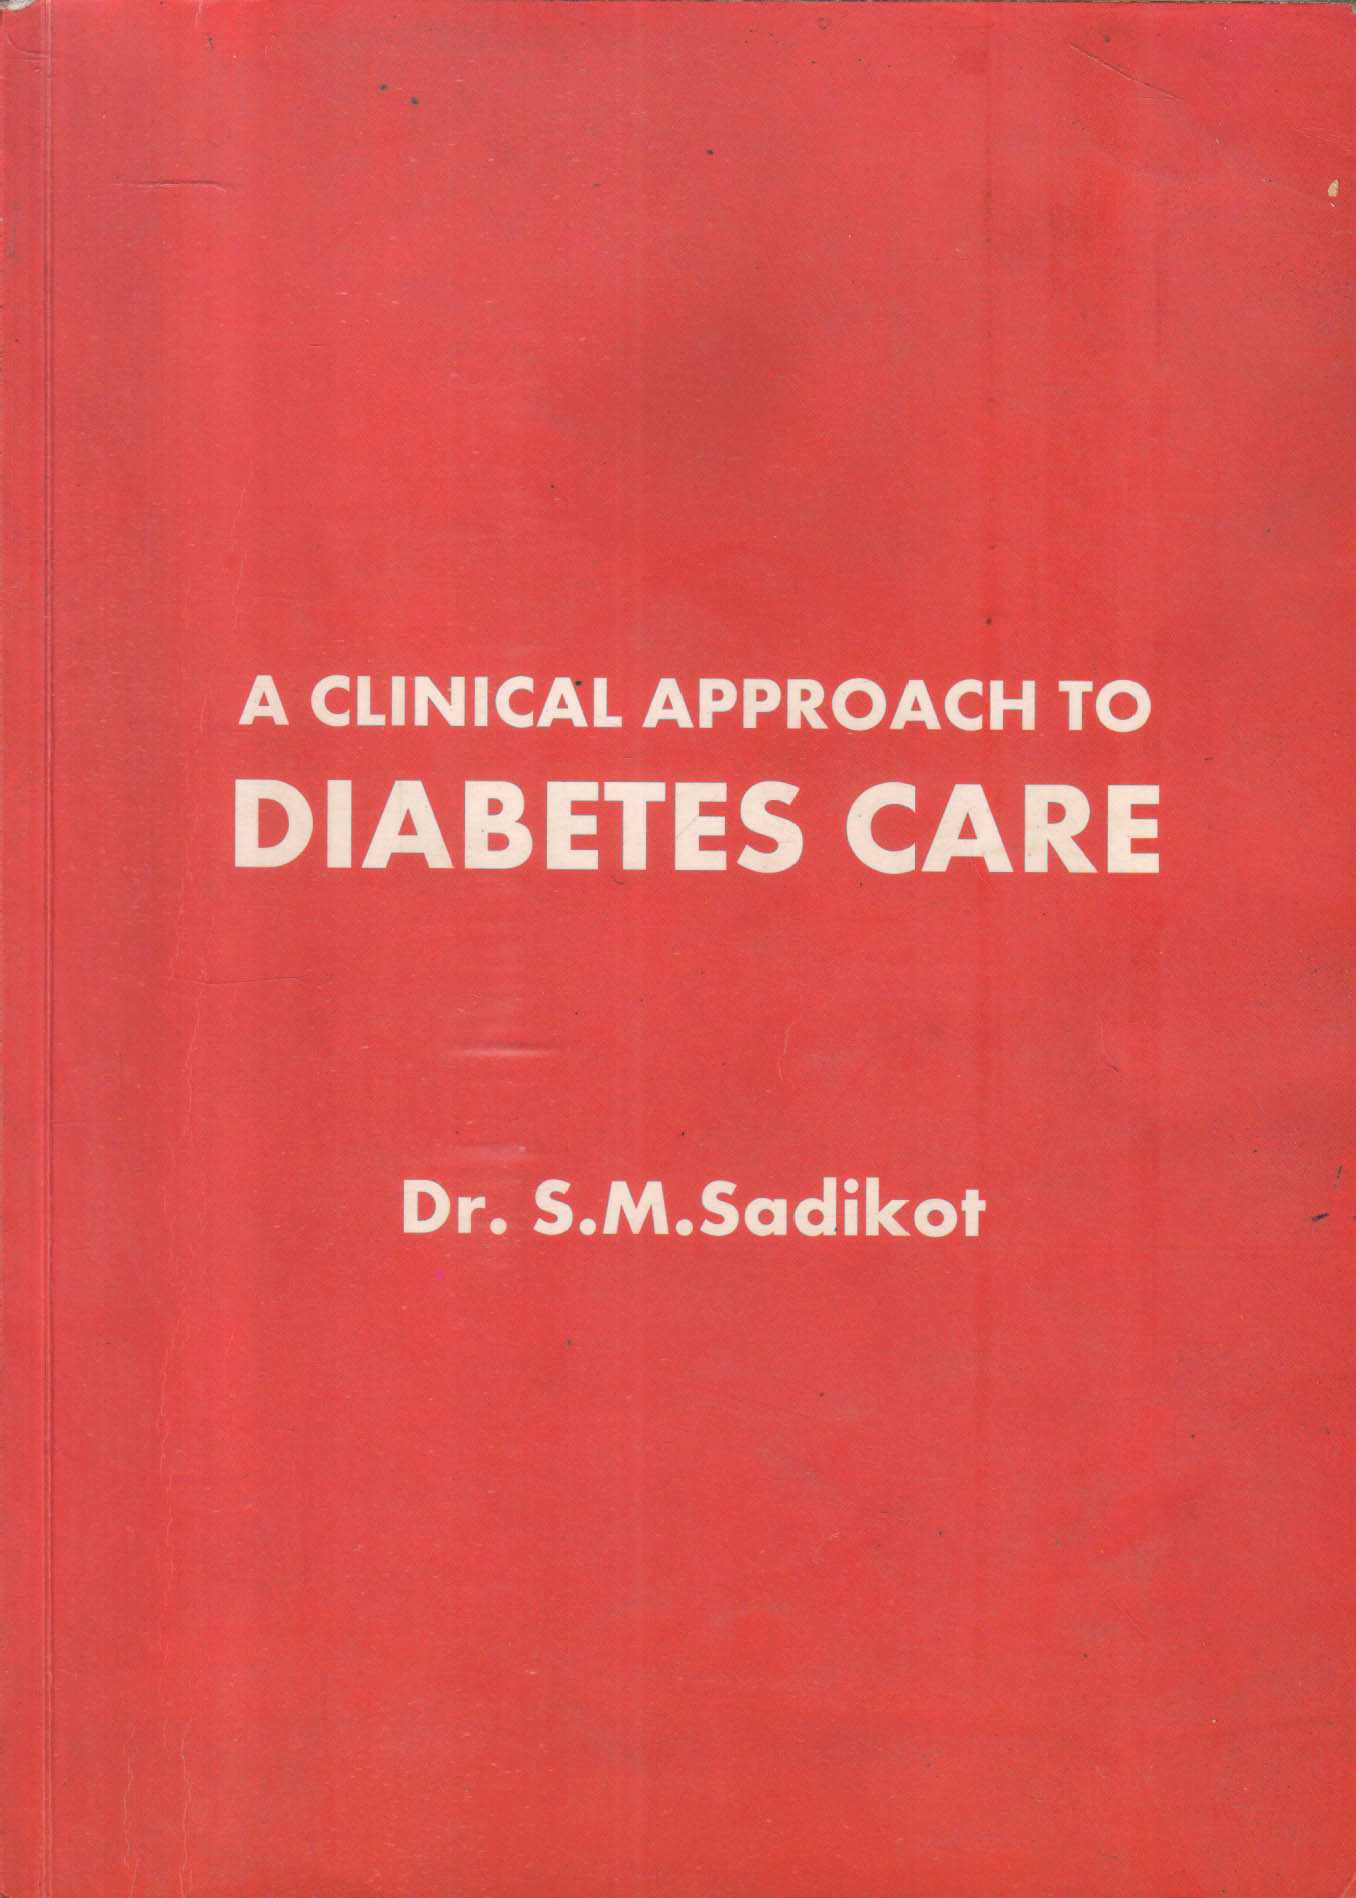 A Clinical Apprach To Diabetes Care